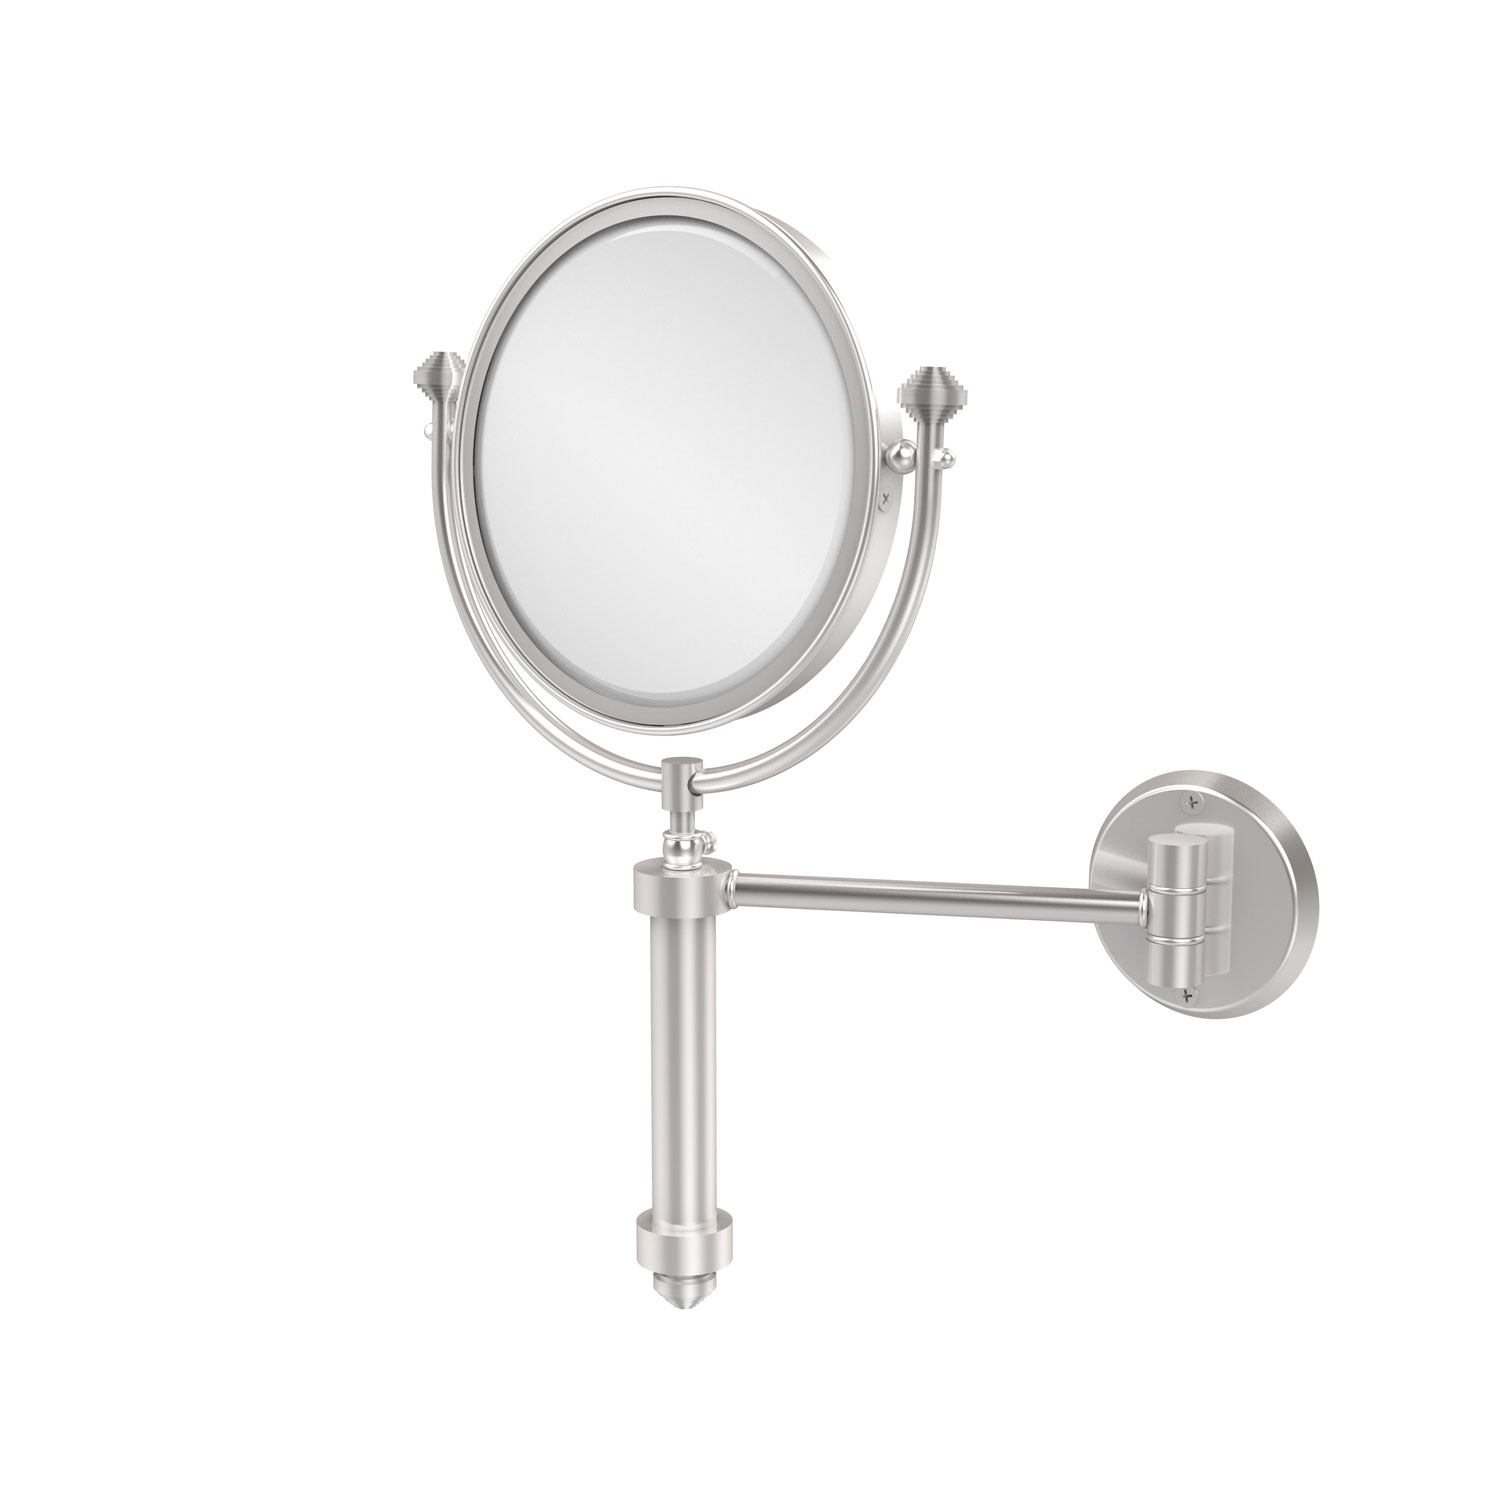 Southbeach Collection Wall Mounted Make-Up Mirror 8 Inch Diameter With 3X Magnification, Satin Chrome